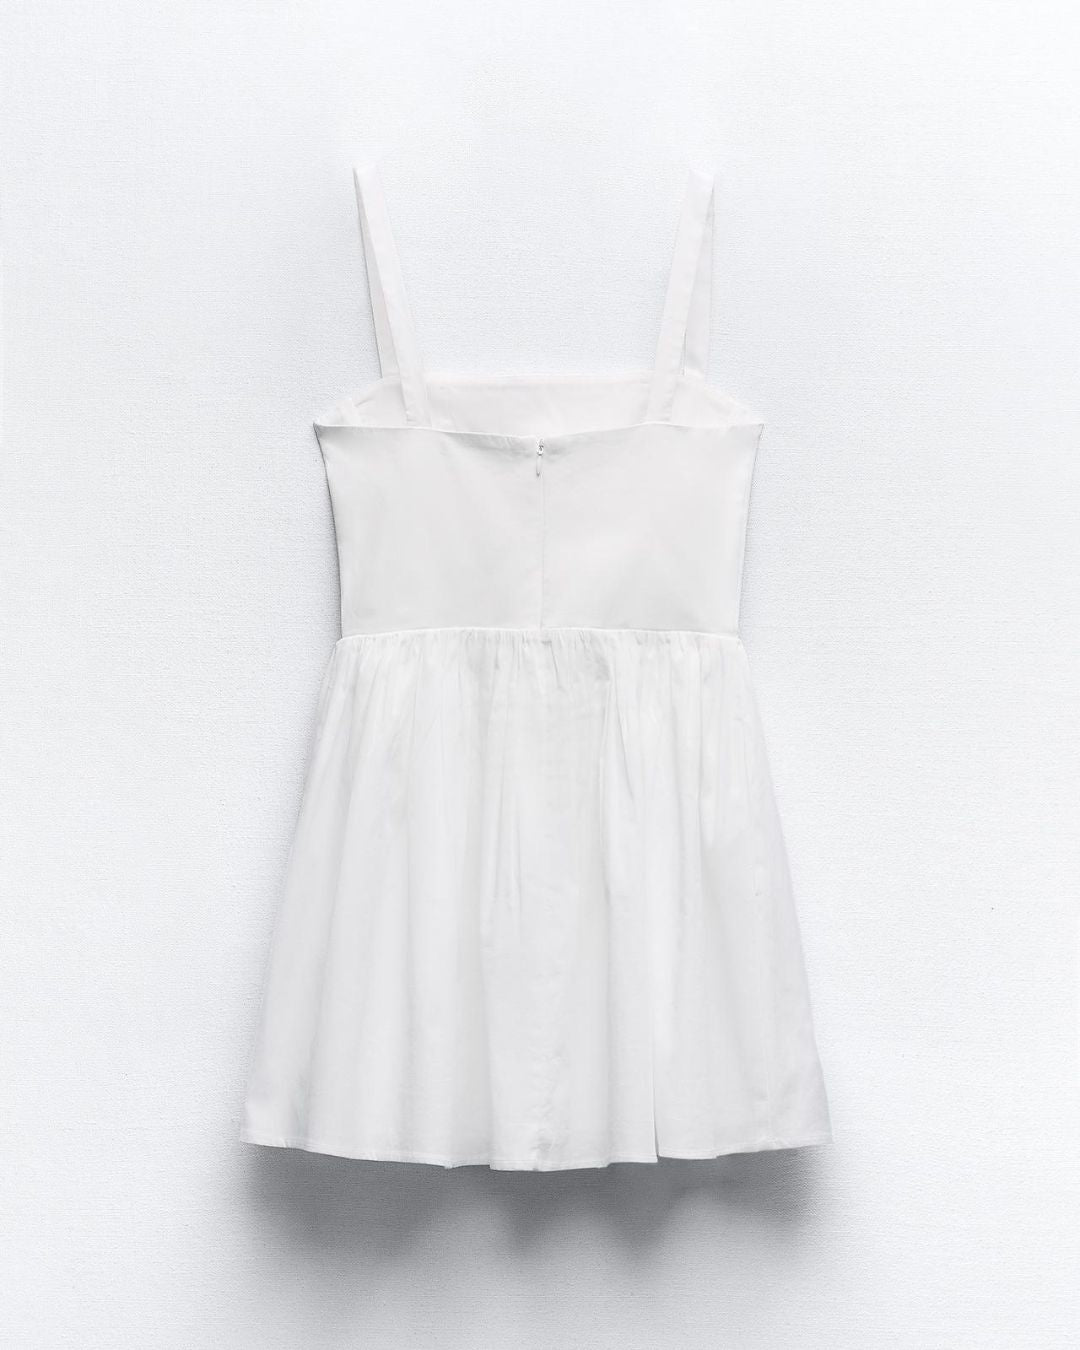 TAILORED FIT AND FLARE DRESS,dresses, fit and flare, gathered, mini, poplin, regular fit, shoulder strap, sleeveless, soft girl, solid, square neck, vacation, white, woven,tailored-fit-and-flare-dress-white,Color- White
Fabric- Poplin
Type- Fit And Flare
Fit- Regular Fit
Length- Mini
Neck- Square Neck
Sleeve- Sleeveless
Print- Solid
Detail- Gathered